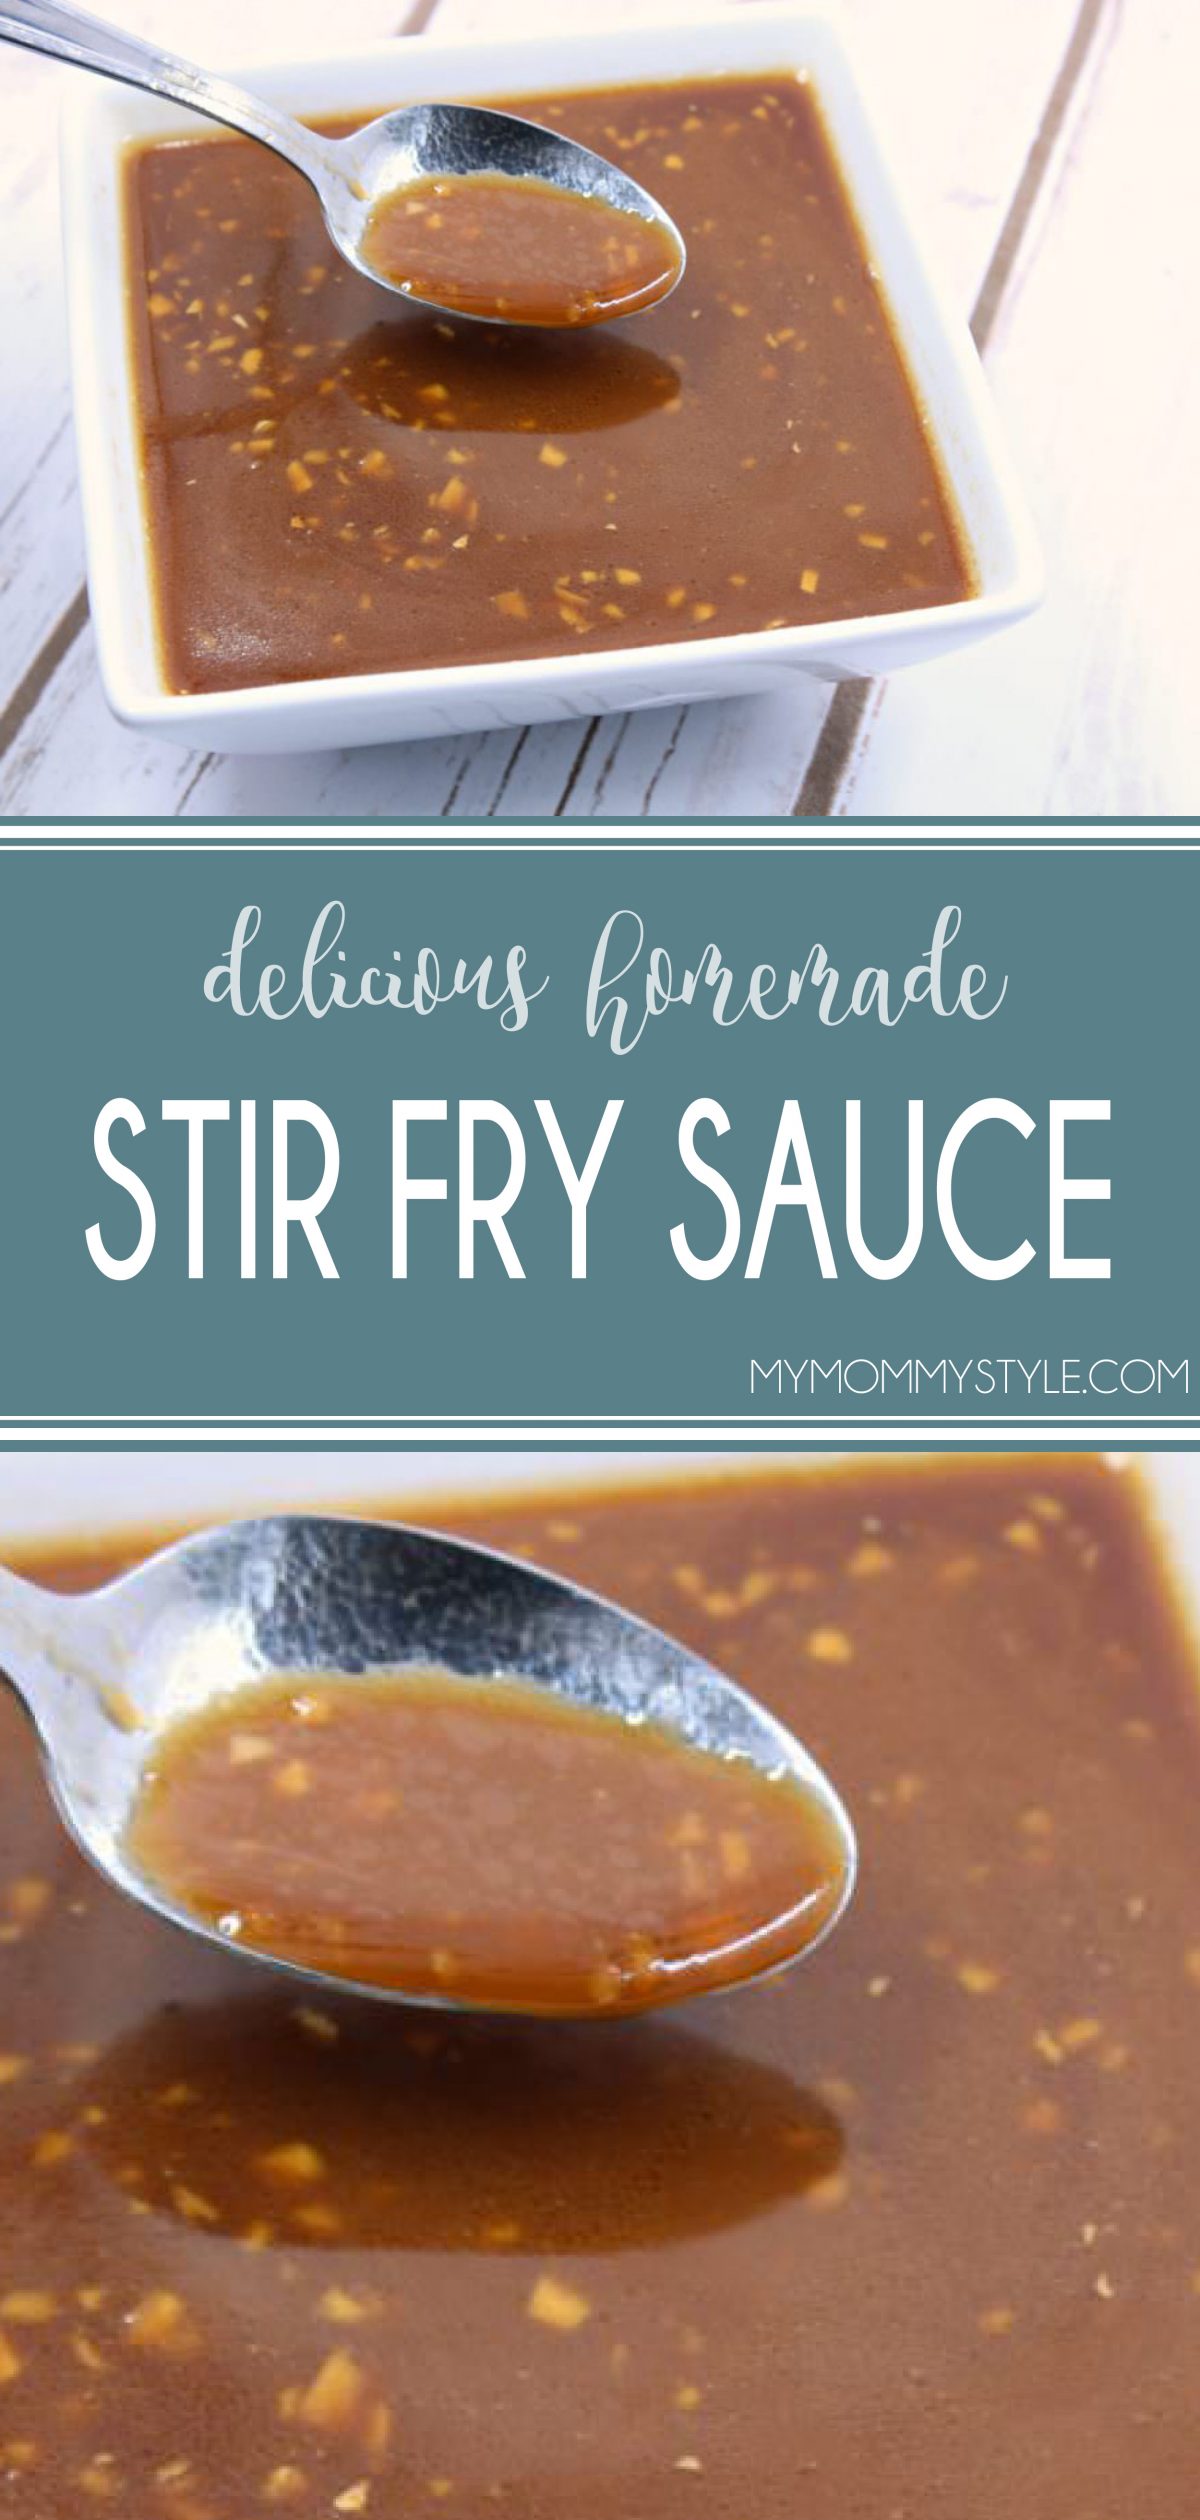 This stir fry sauce is so delicious and the perfect addition to your meat and vegetable stir fry. Stores well in the fridge for up to a week! via @mymommystyle